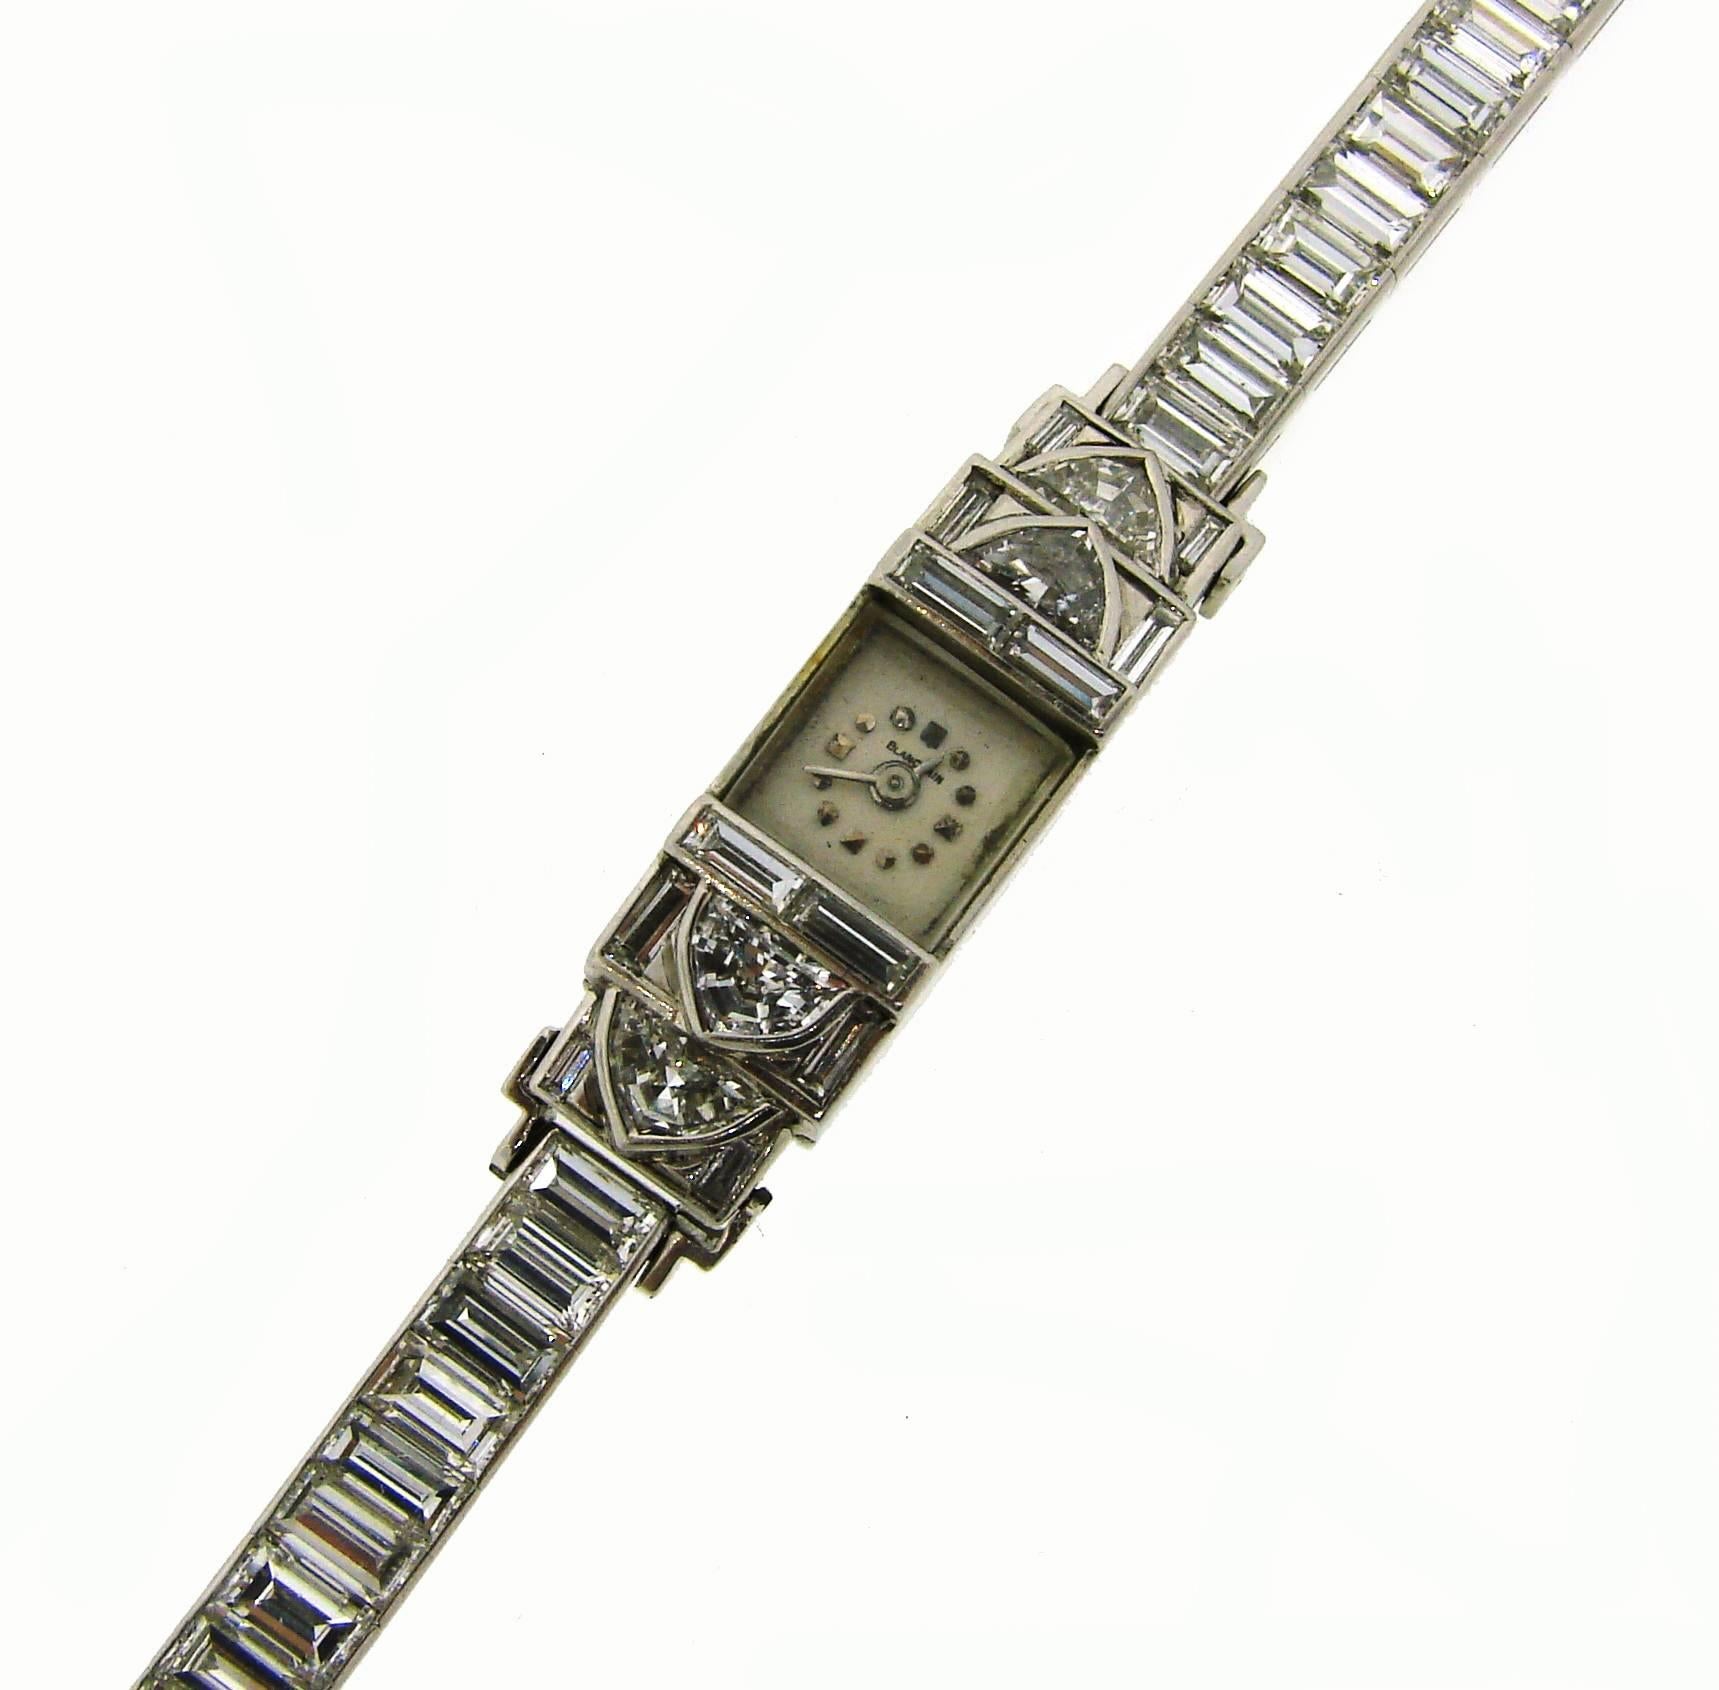 Beautiful, classy, elegant and timeless dressy Art Deco watch / bracelet that is a great addition to your jewelry collection. Created by Blancpain in the 1930's. It is made of platinum (tested) and set with approximately 14 carats of step cut and